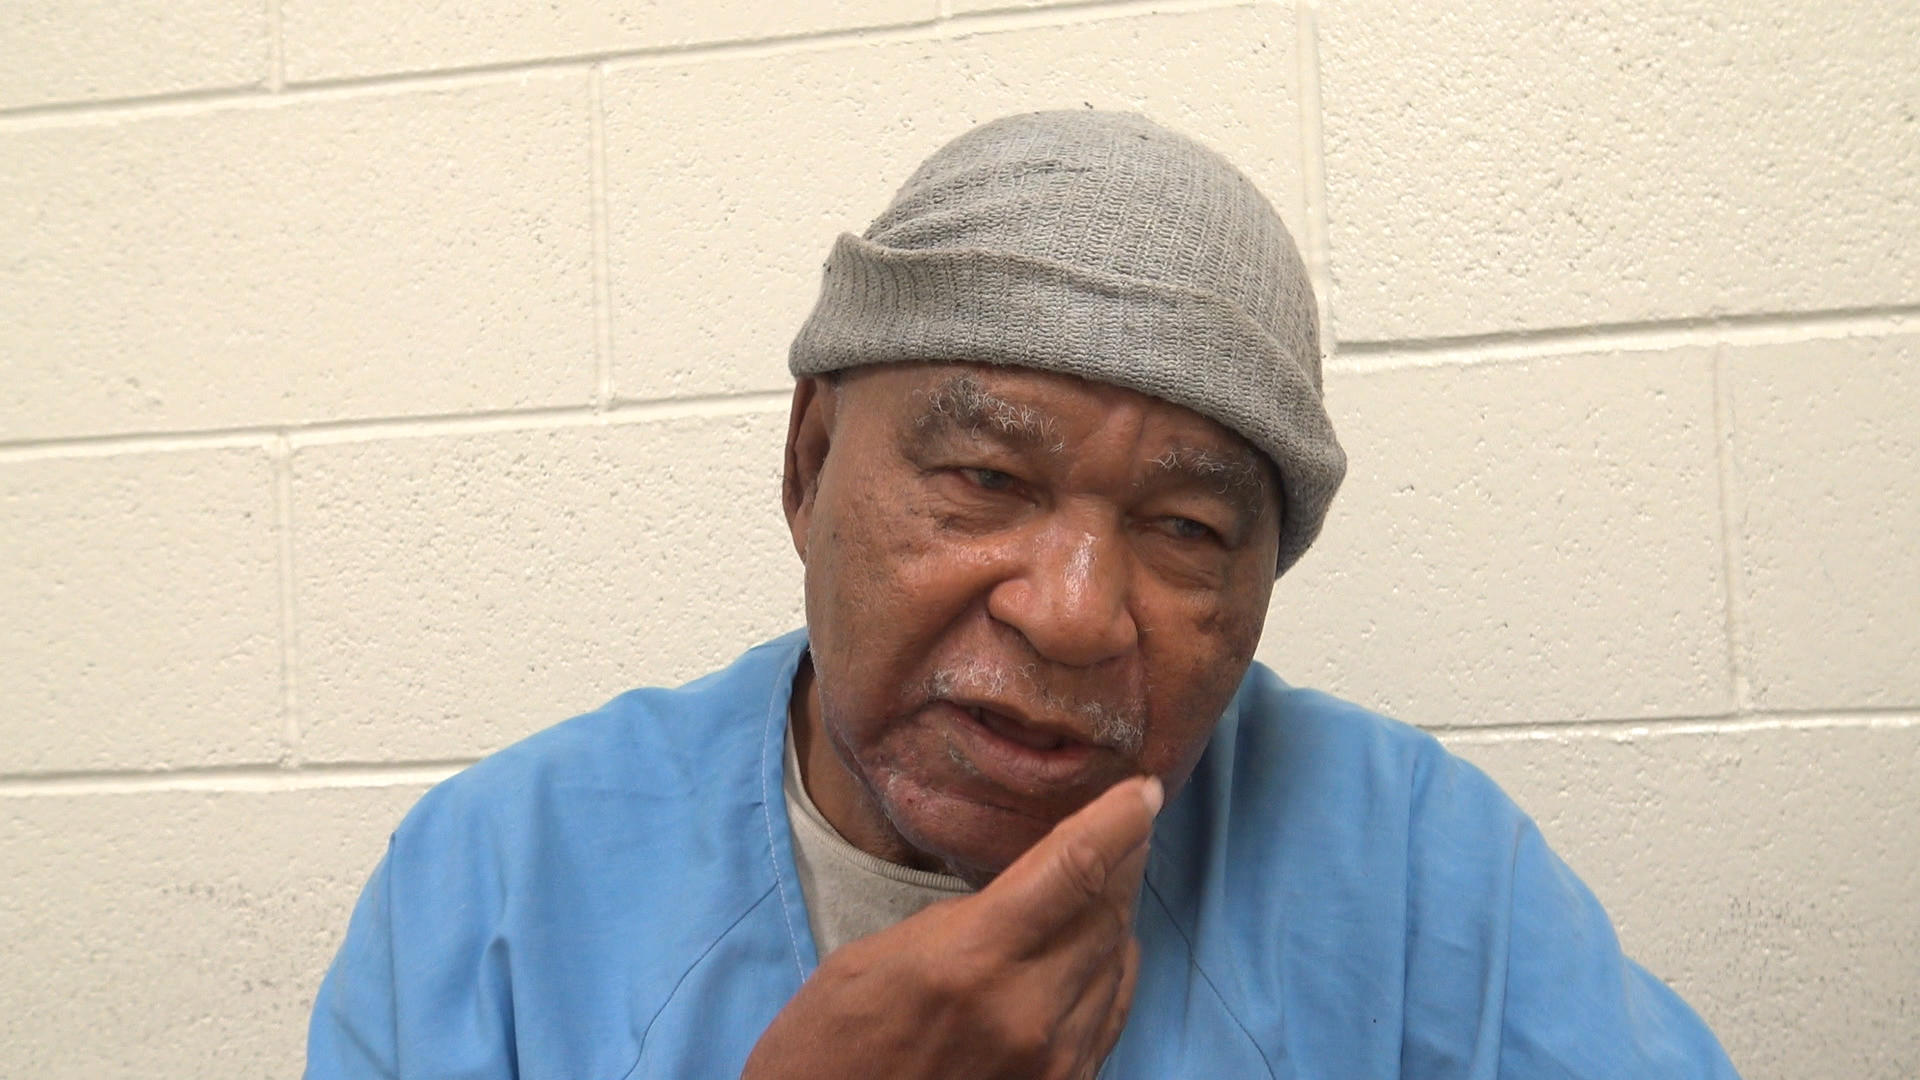 FBI confirms Samuel Little’s confession: He is the worst serial killer in U.S. history